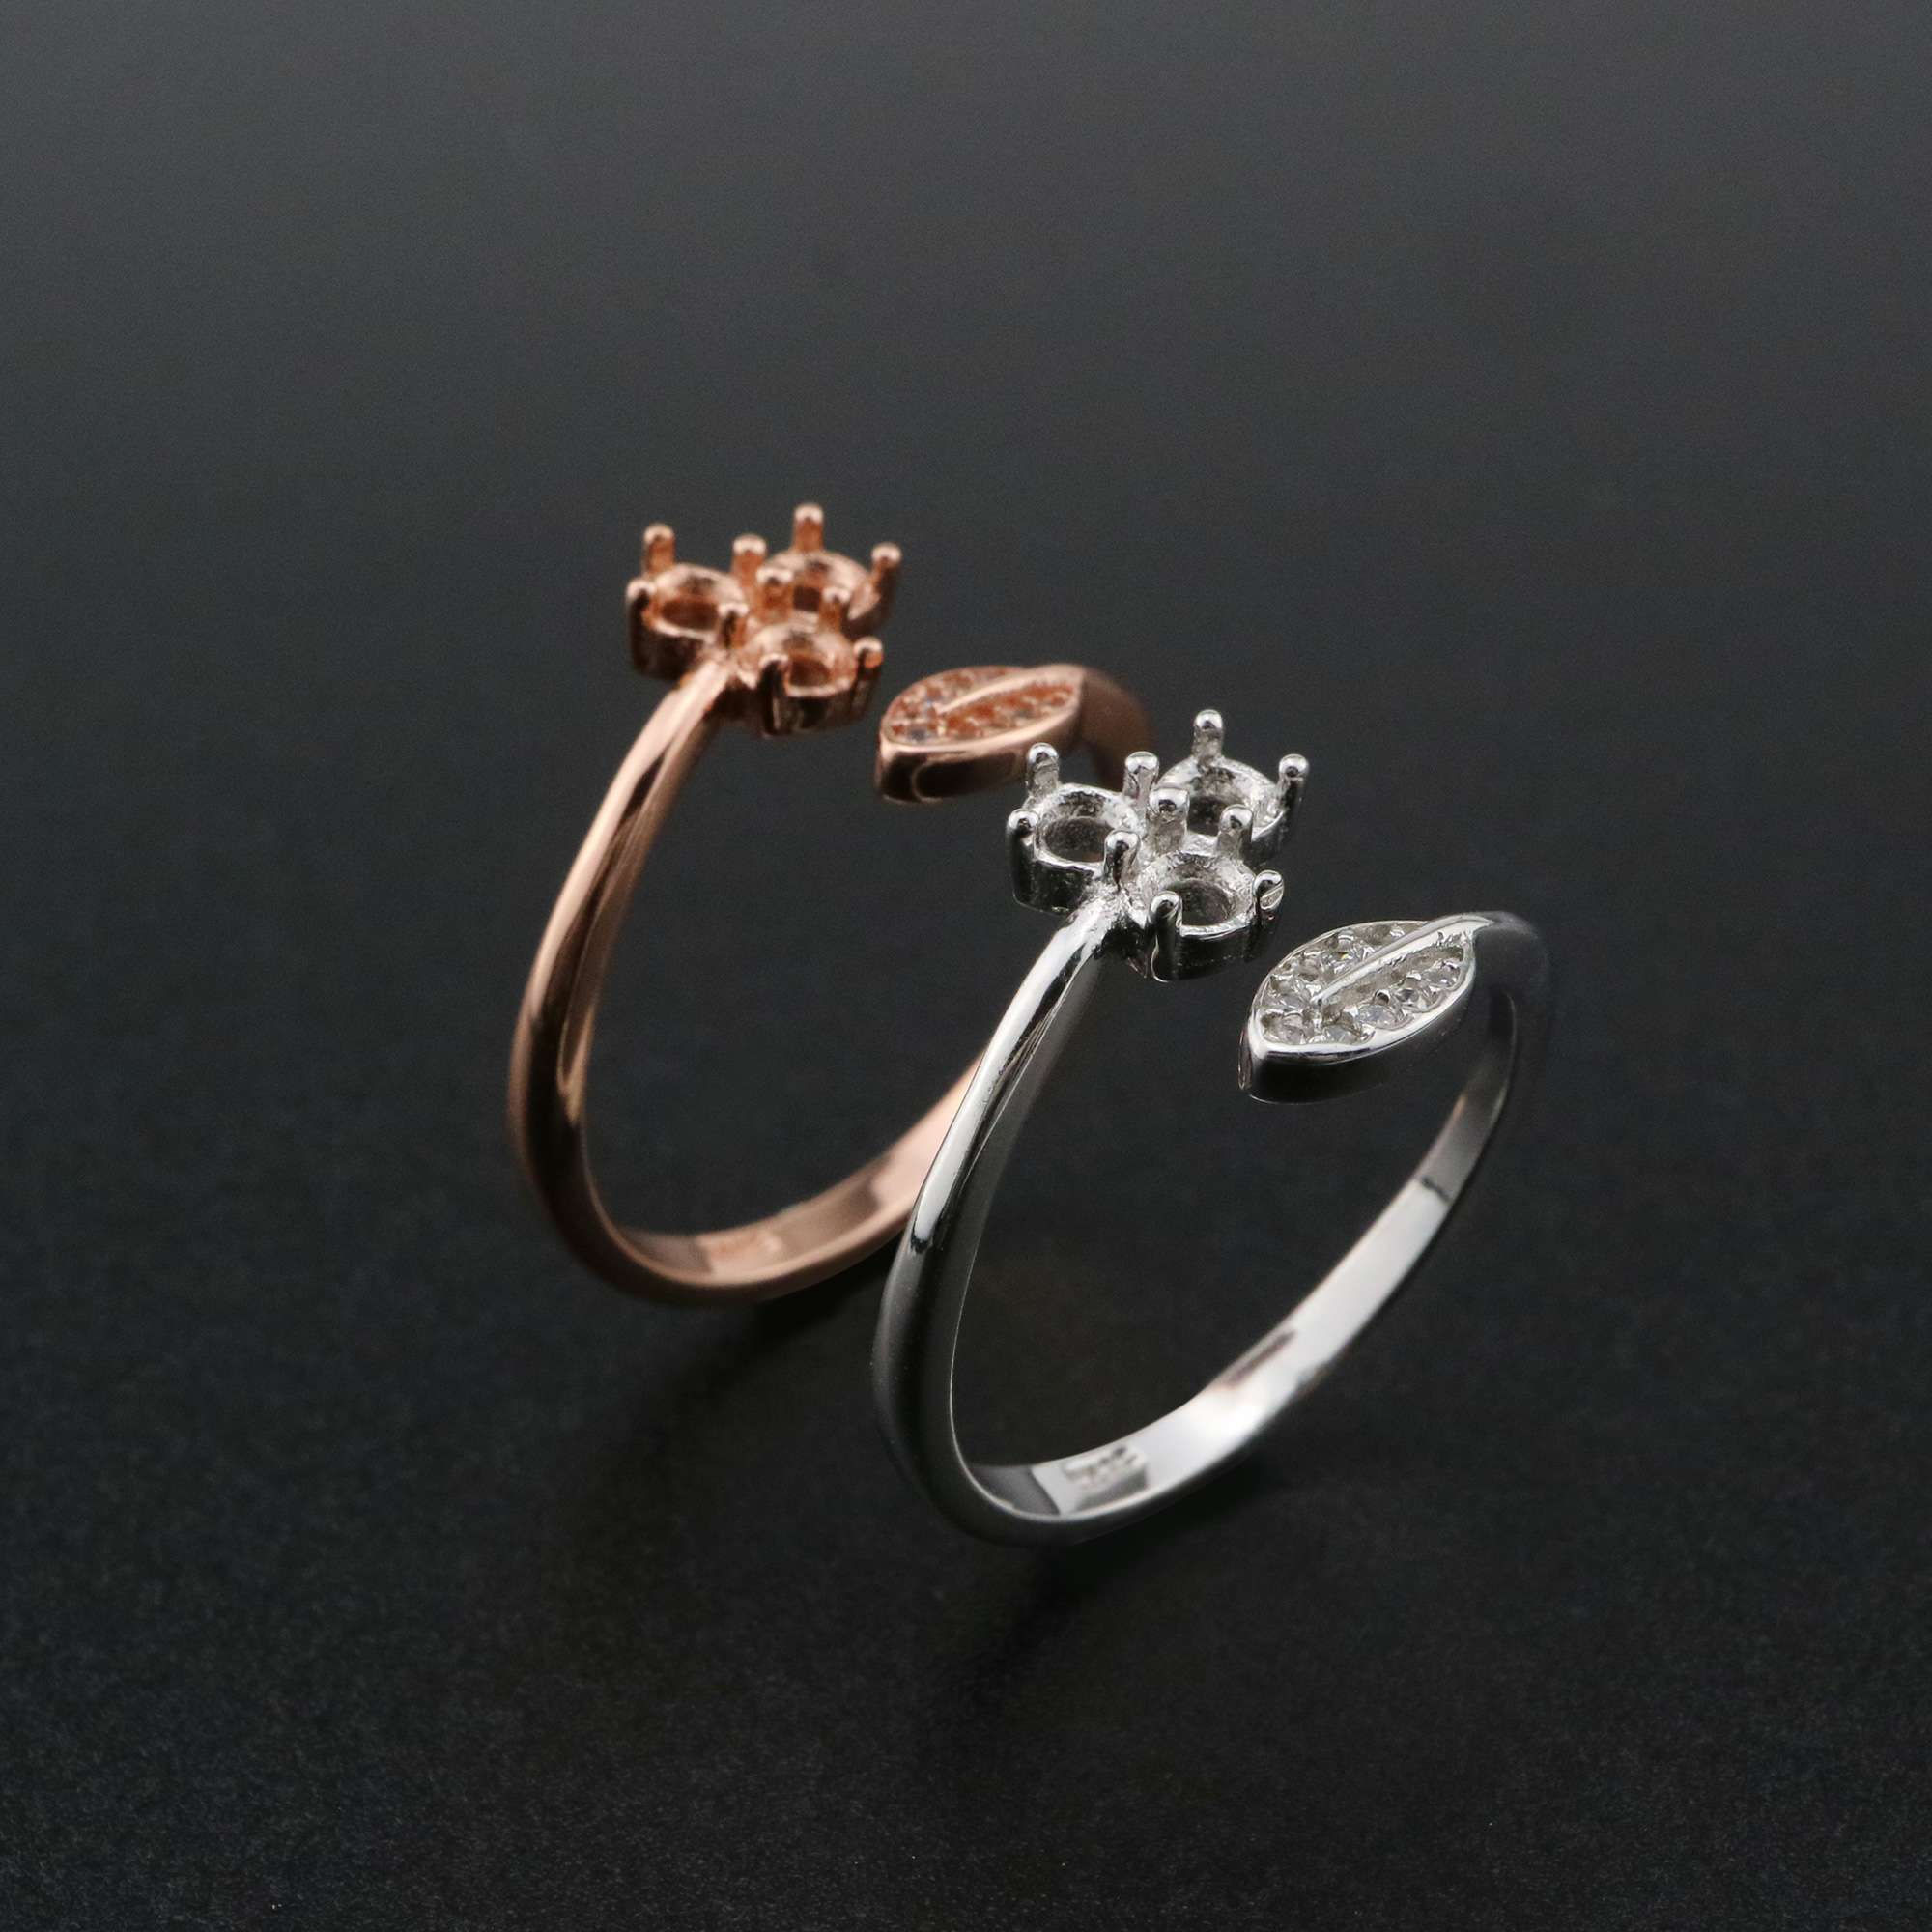 1Pcs 3MM Round 3 Stones Flower Leaf Rose Gold Plated Solid 925 Sterling Silver Adjustable Prong Ring Settings Blank for Gemstone 1210070 - Click Image to Close